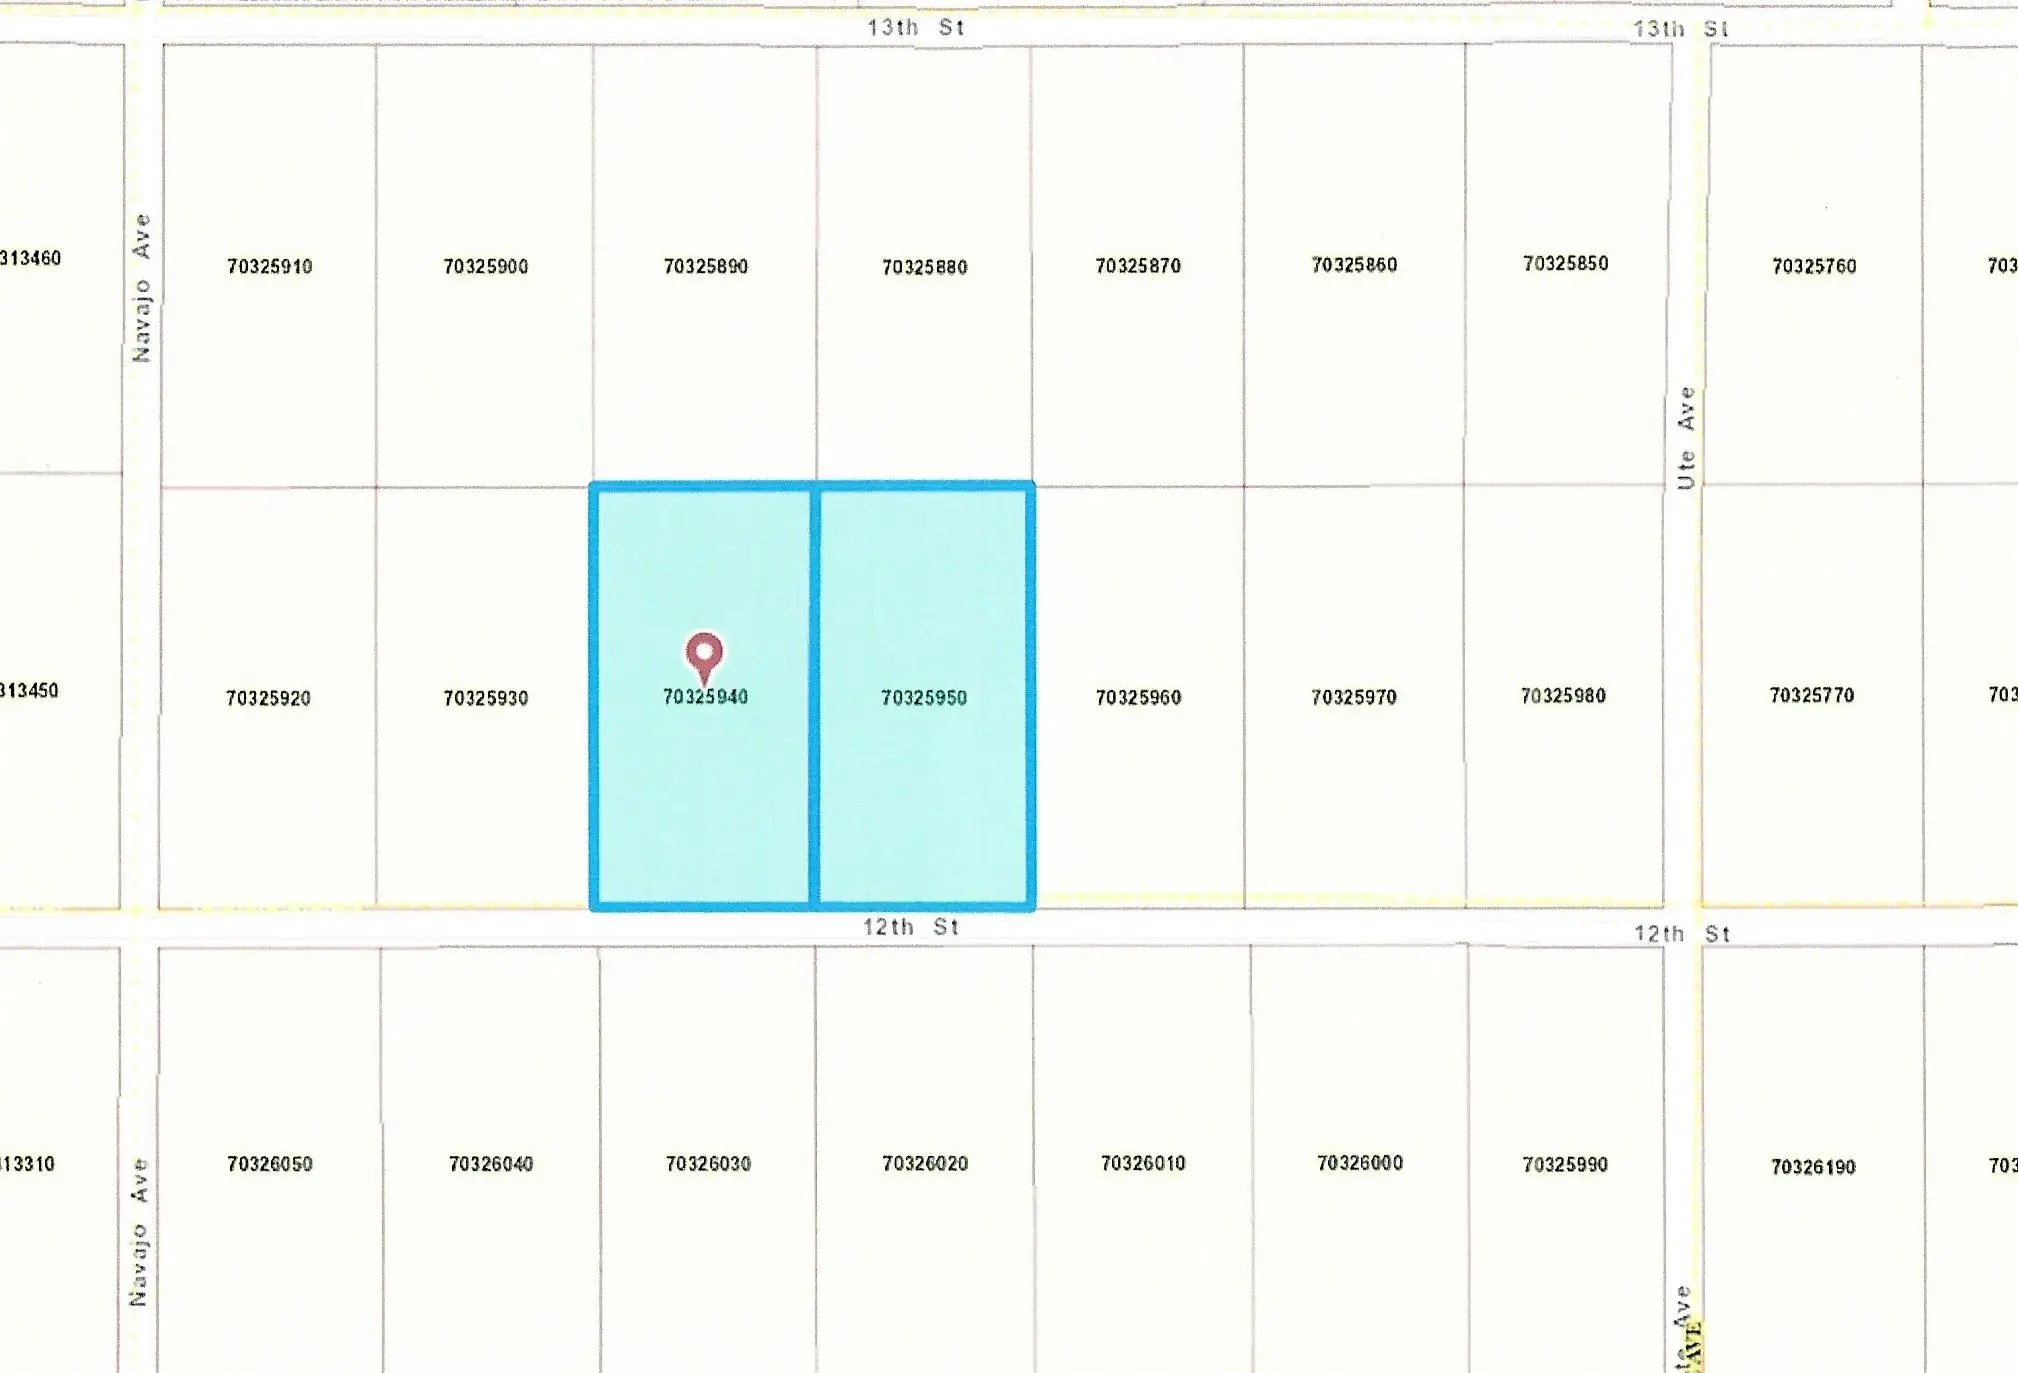 10-Acres-SLVR-On-12th-St-Lots-10-11-Tax-Map-Scan